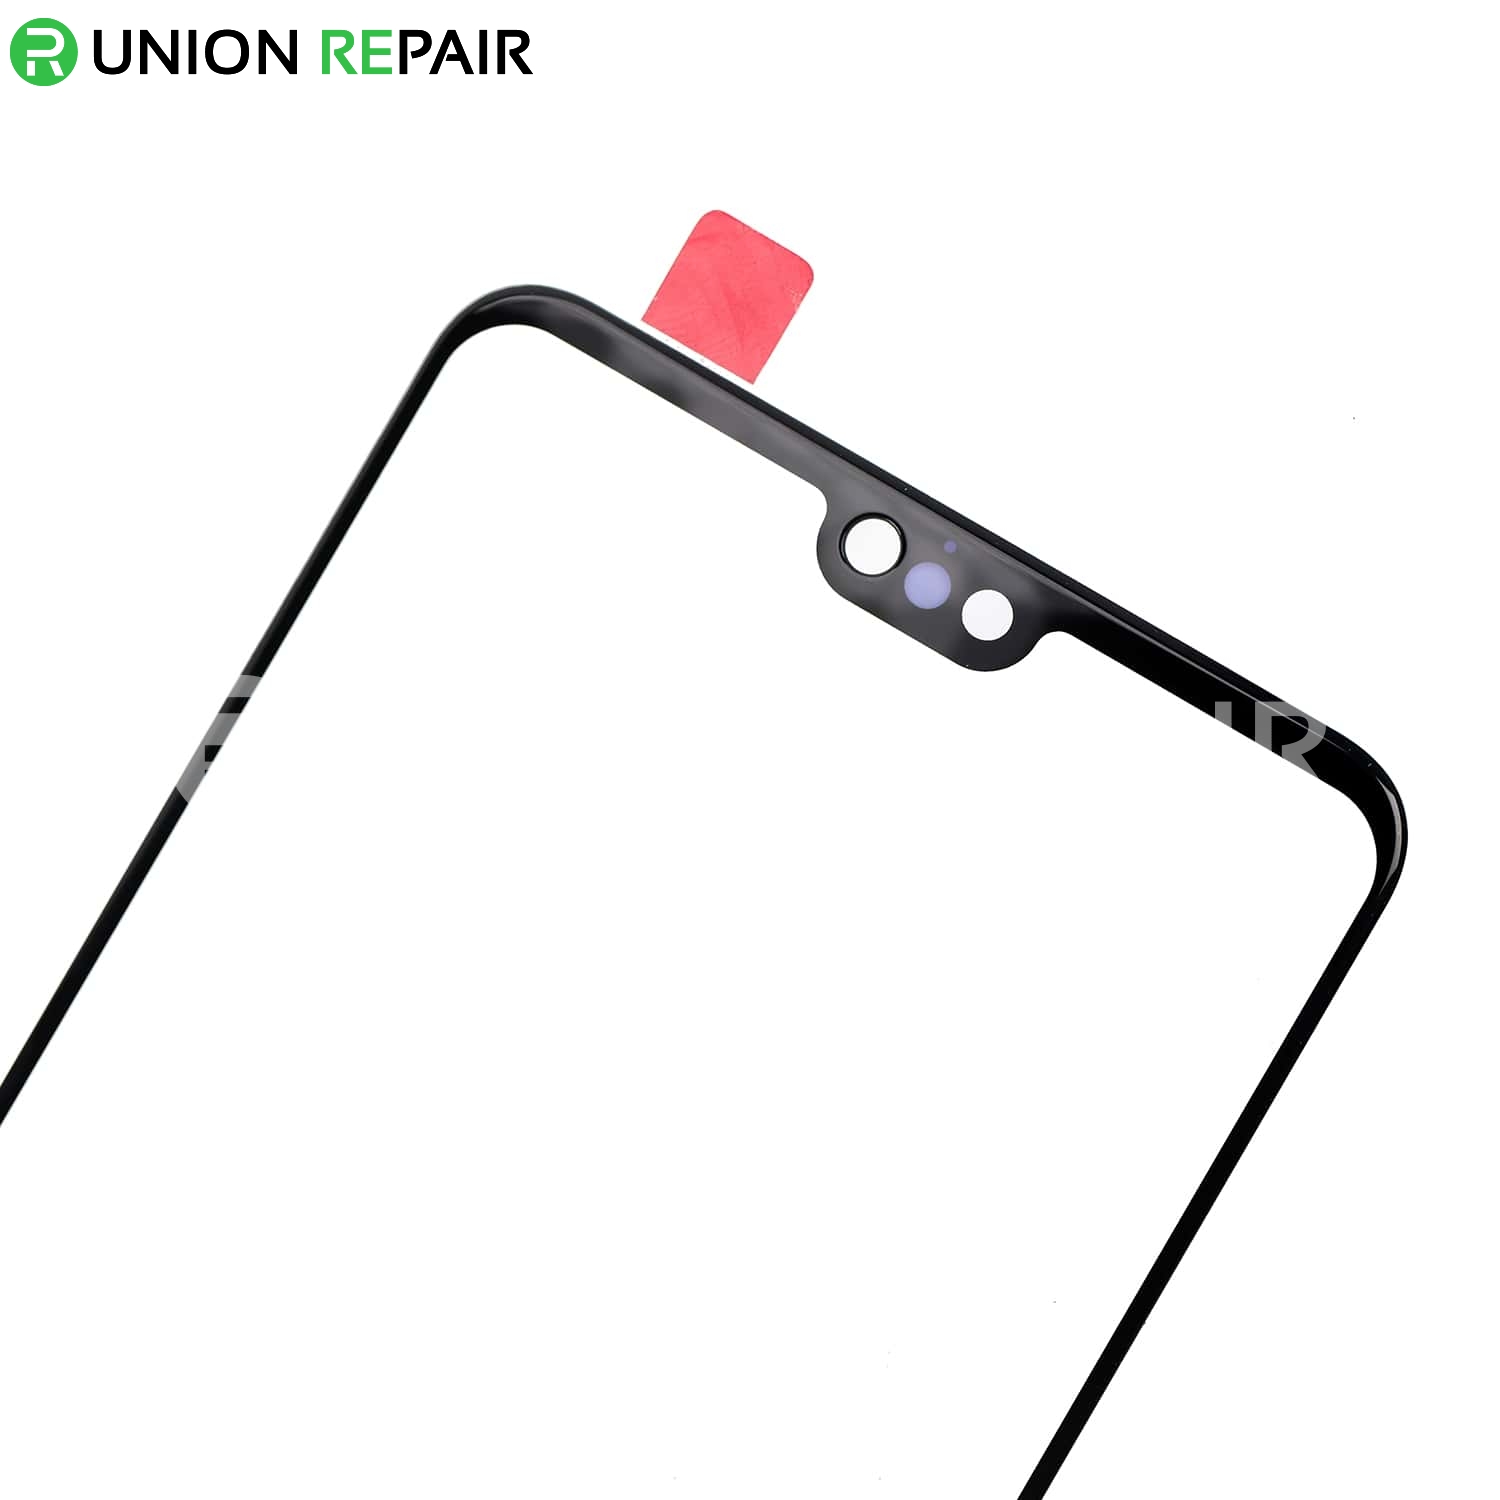 Replacement for Huawei P20 Front Glass Lens - Black